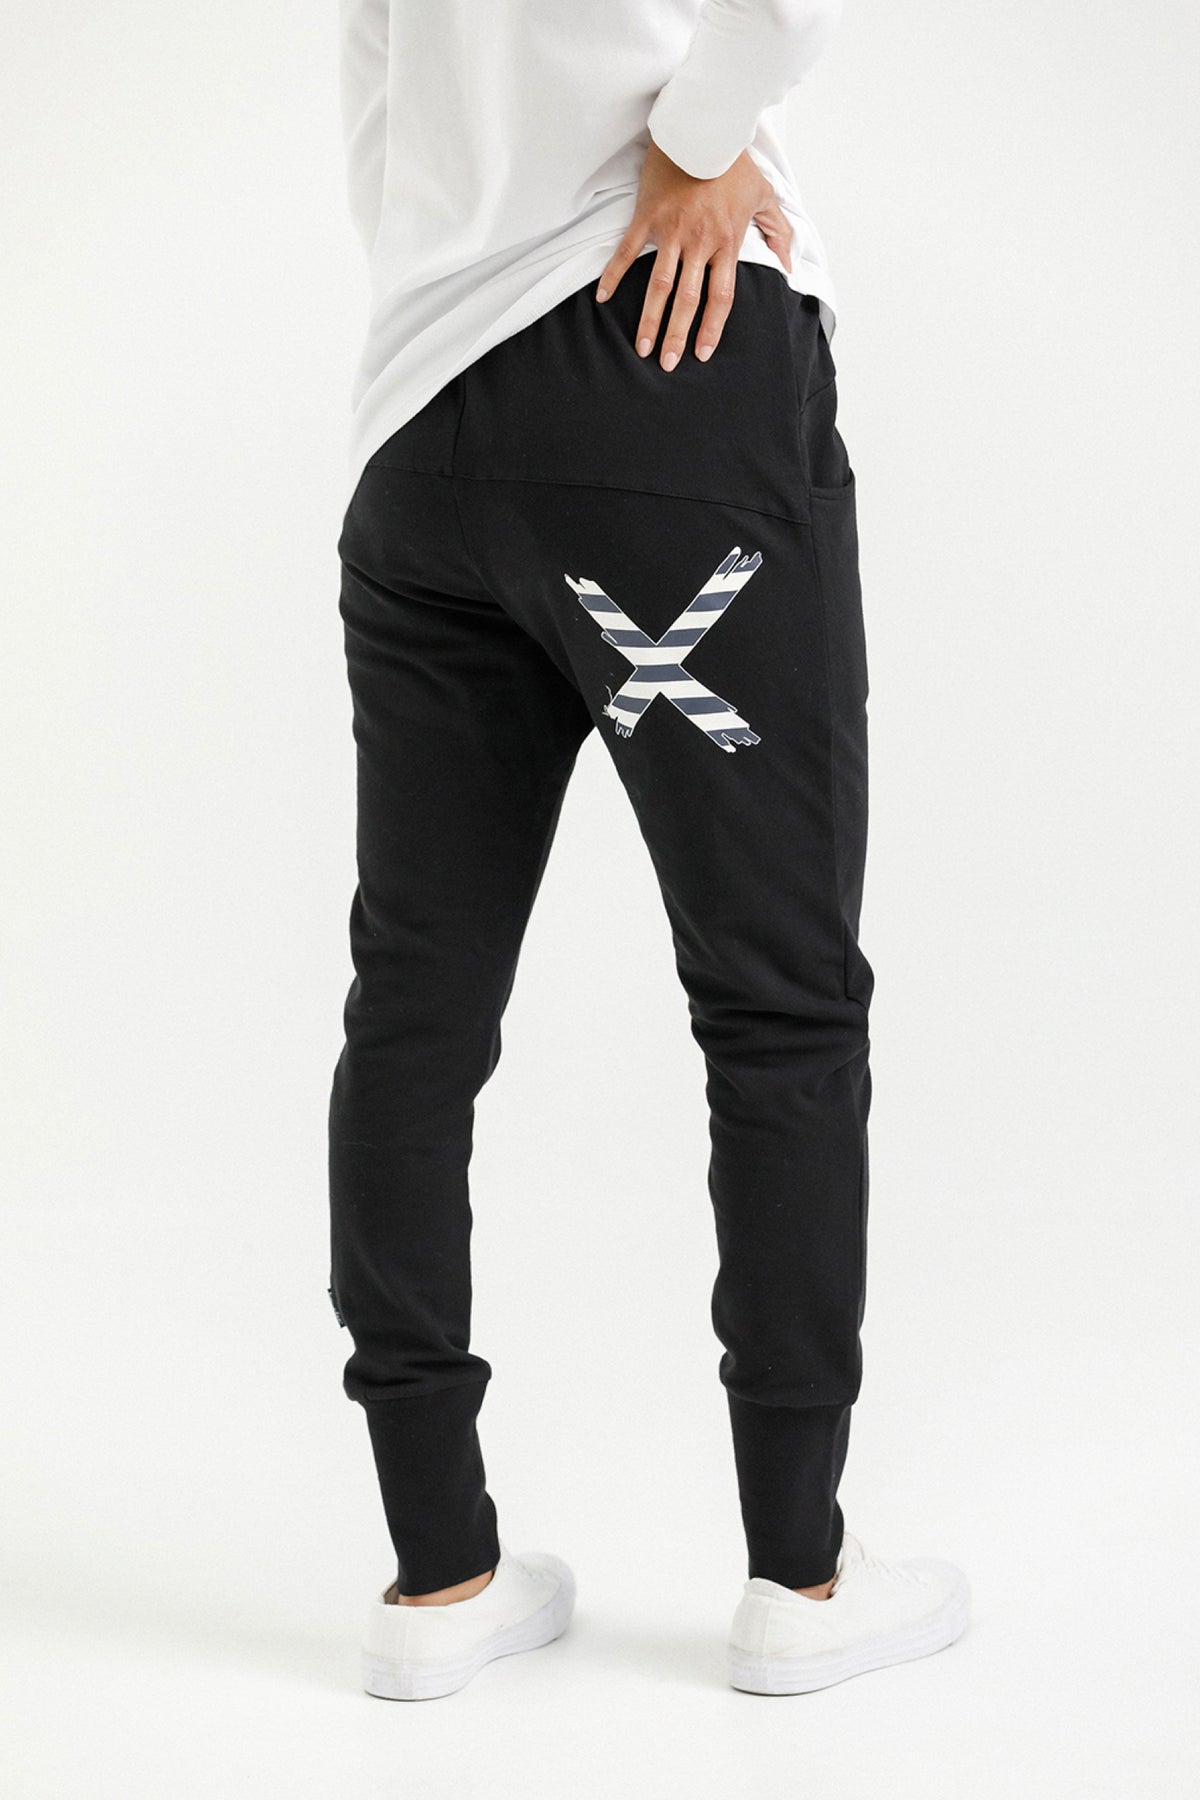 Apartment Pants Winter Black With Indigo Blue Stripe - PREORDER DELIVERY EARLY JUNE